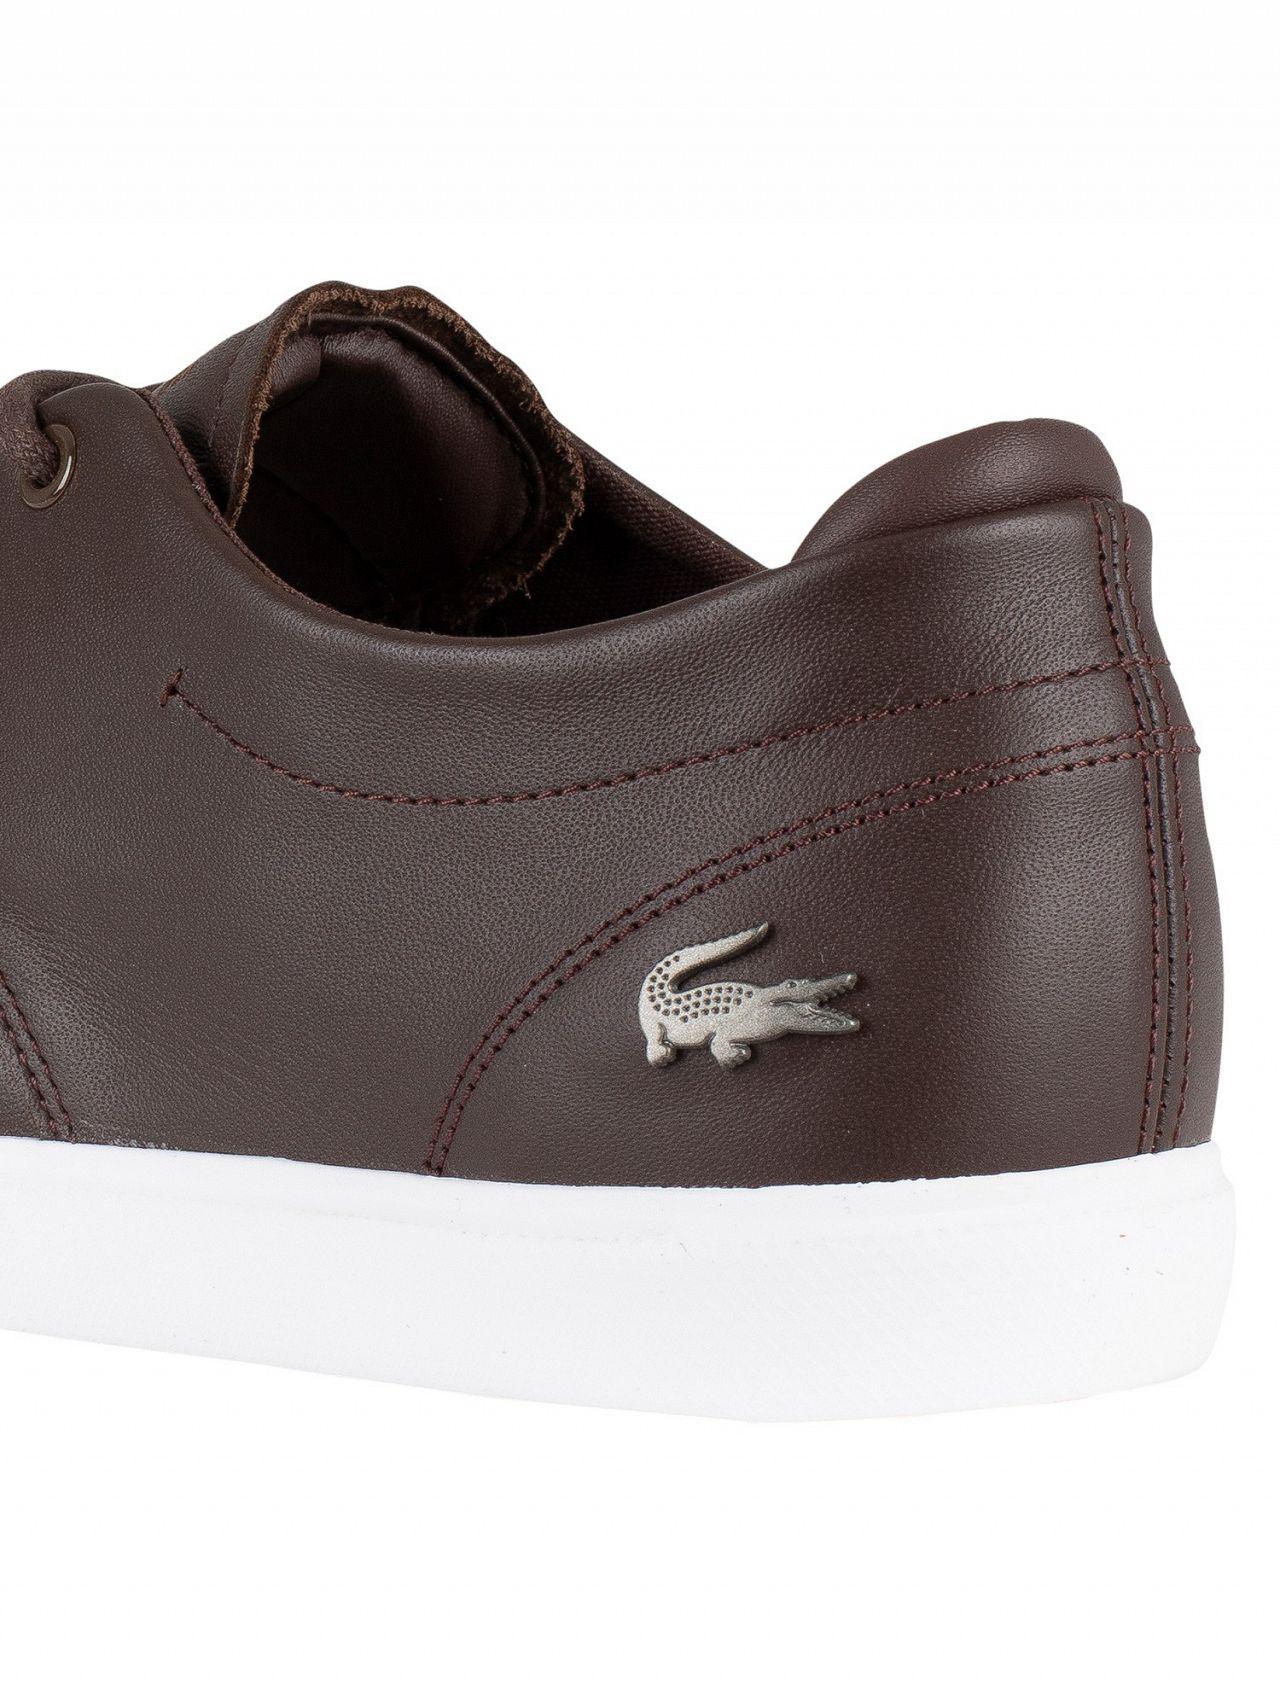 Lacoste Brown/white Esparre Bl 1 Cma Leather Trainers for Men - Lyst